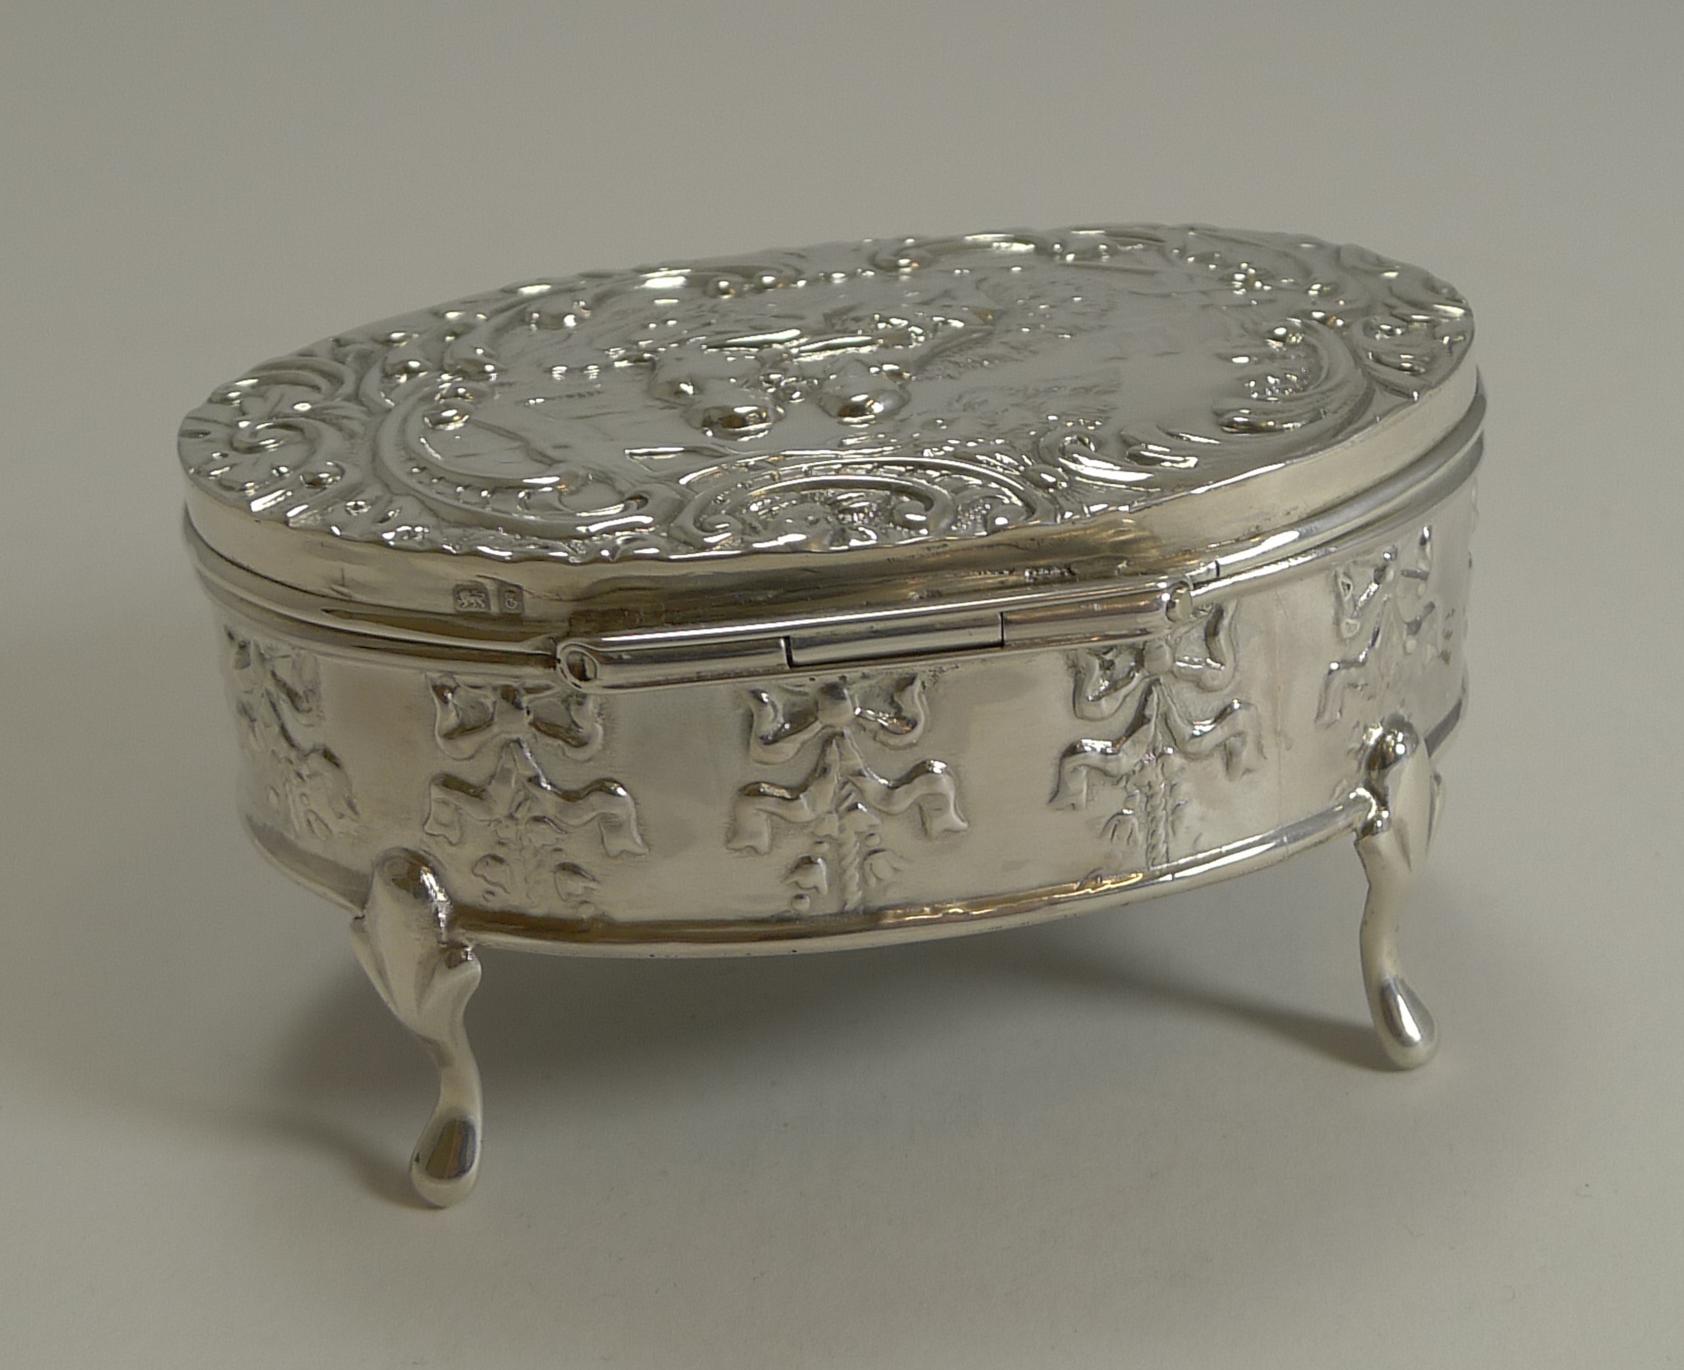 Early 20th Century Antique, English Sterling Silver Figural Jewellery/Trinket Box, 1905